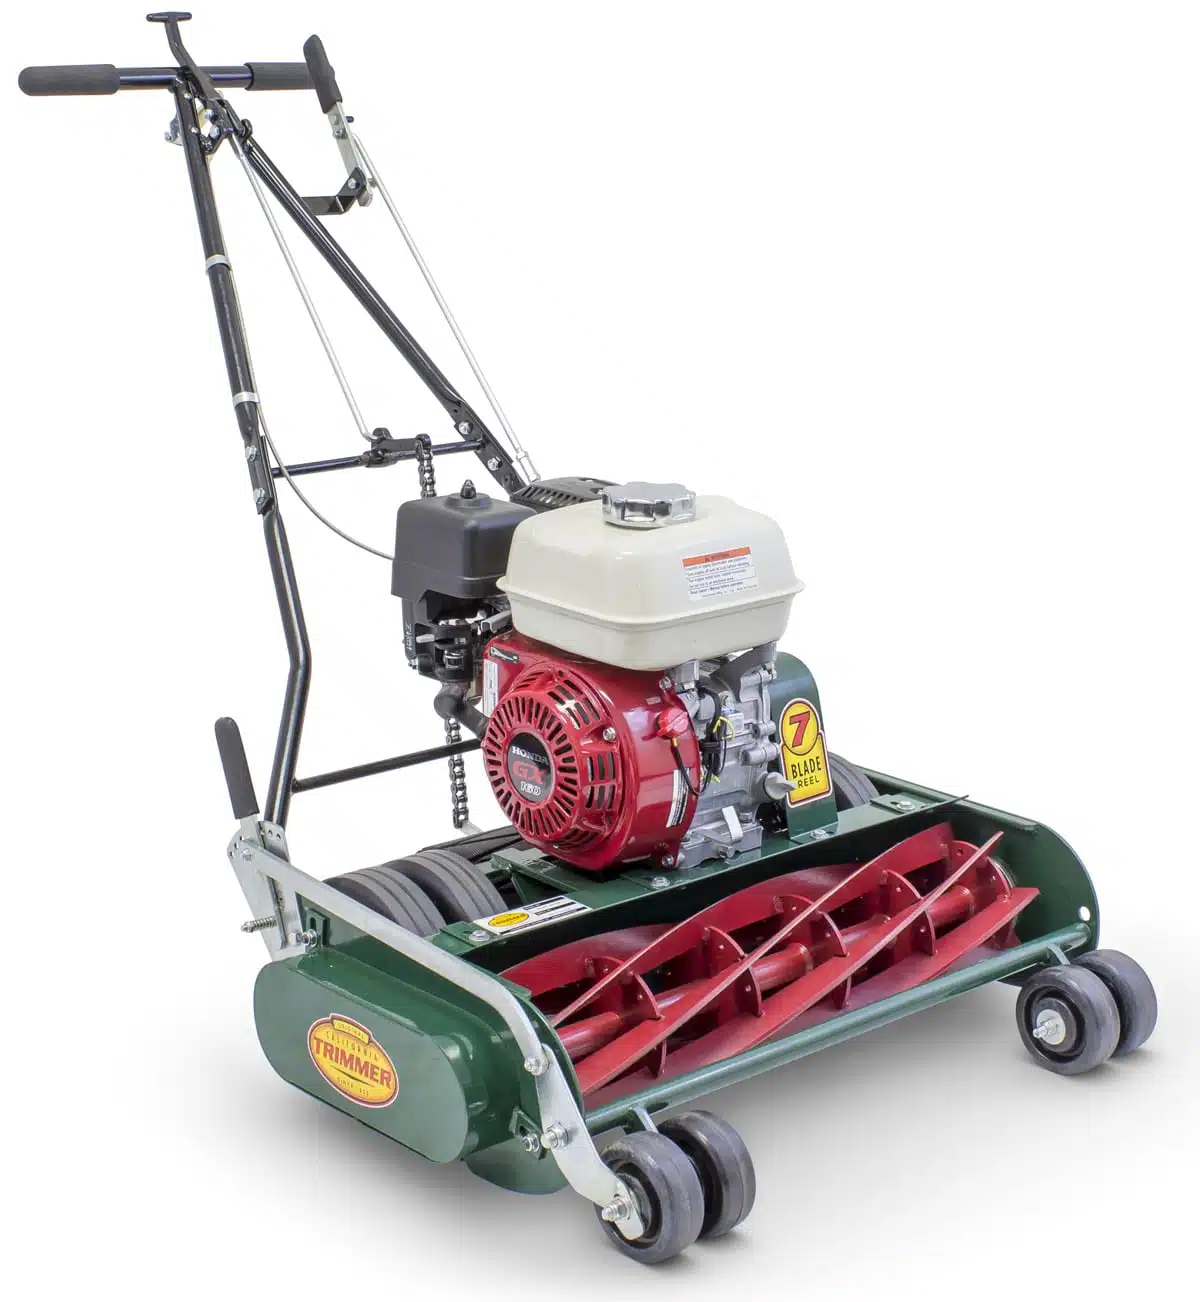 Trimmer 25″ – 7 Commercial Reel Mower with 5.5HP Honda GX160 Engine | Reel